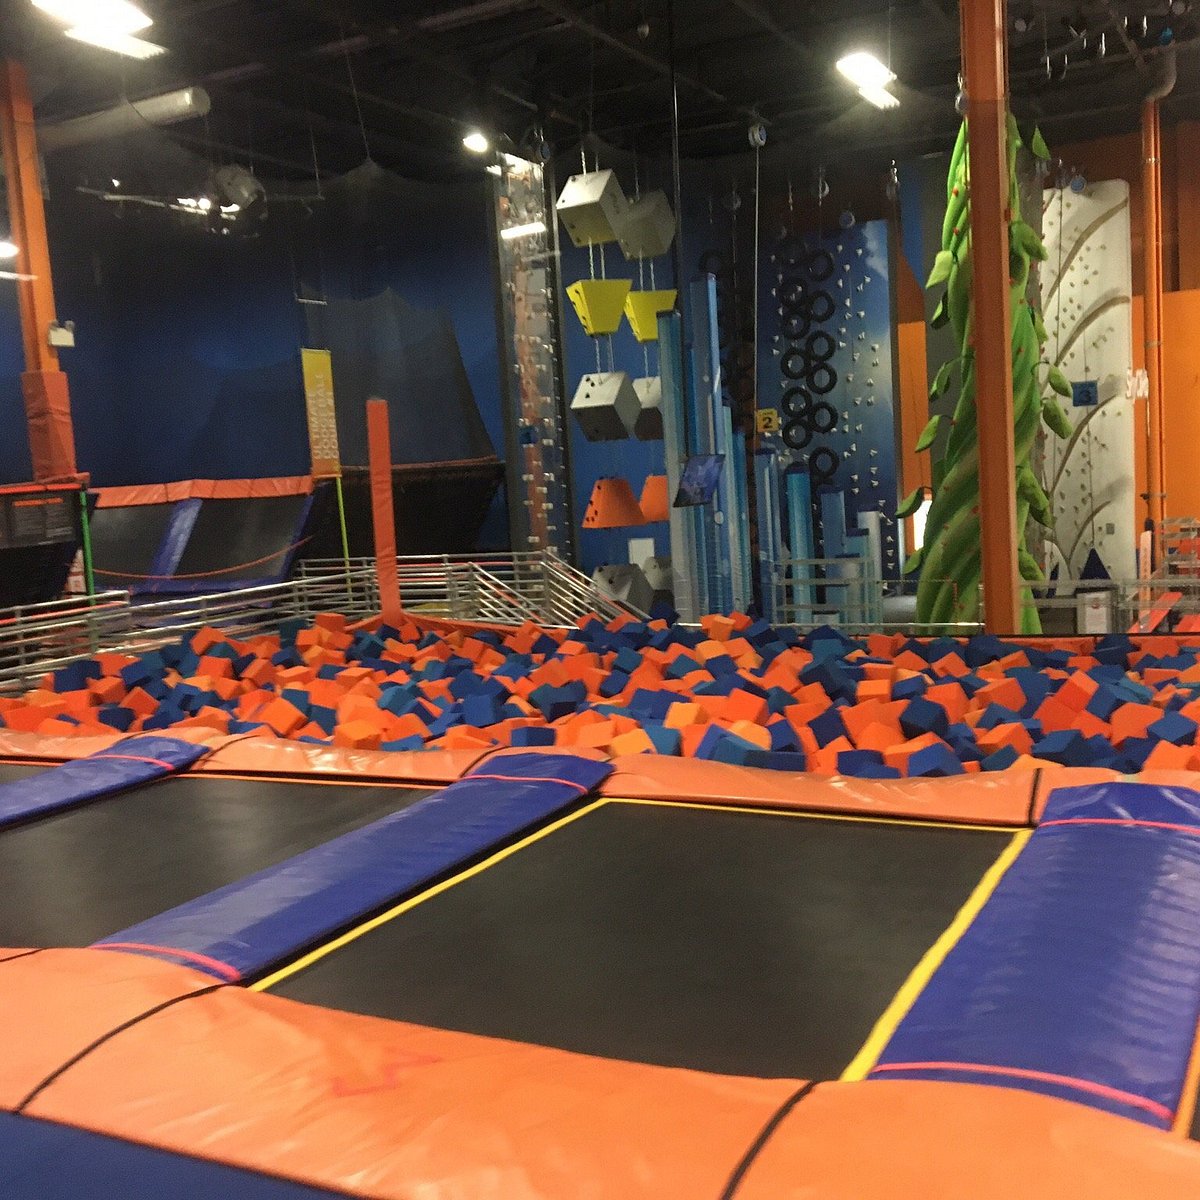 Sky Zone Trampoline Park Lancaster All You Need to Know BEFORE You Go